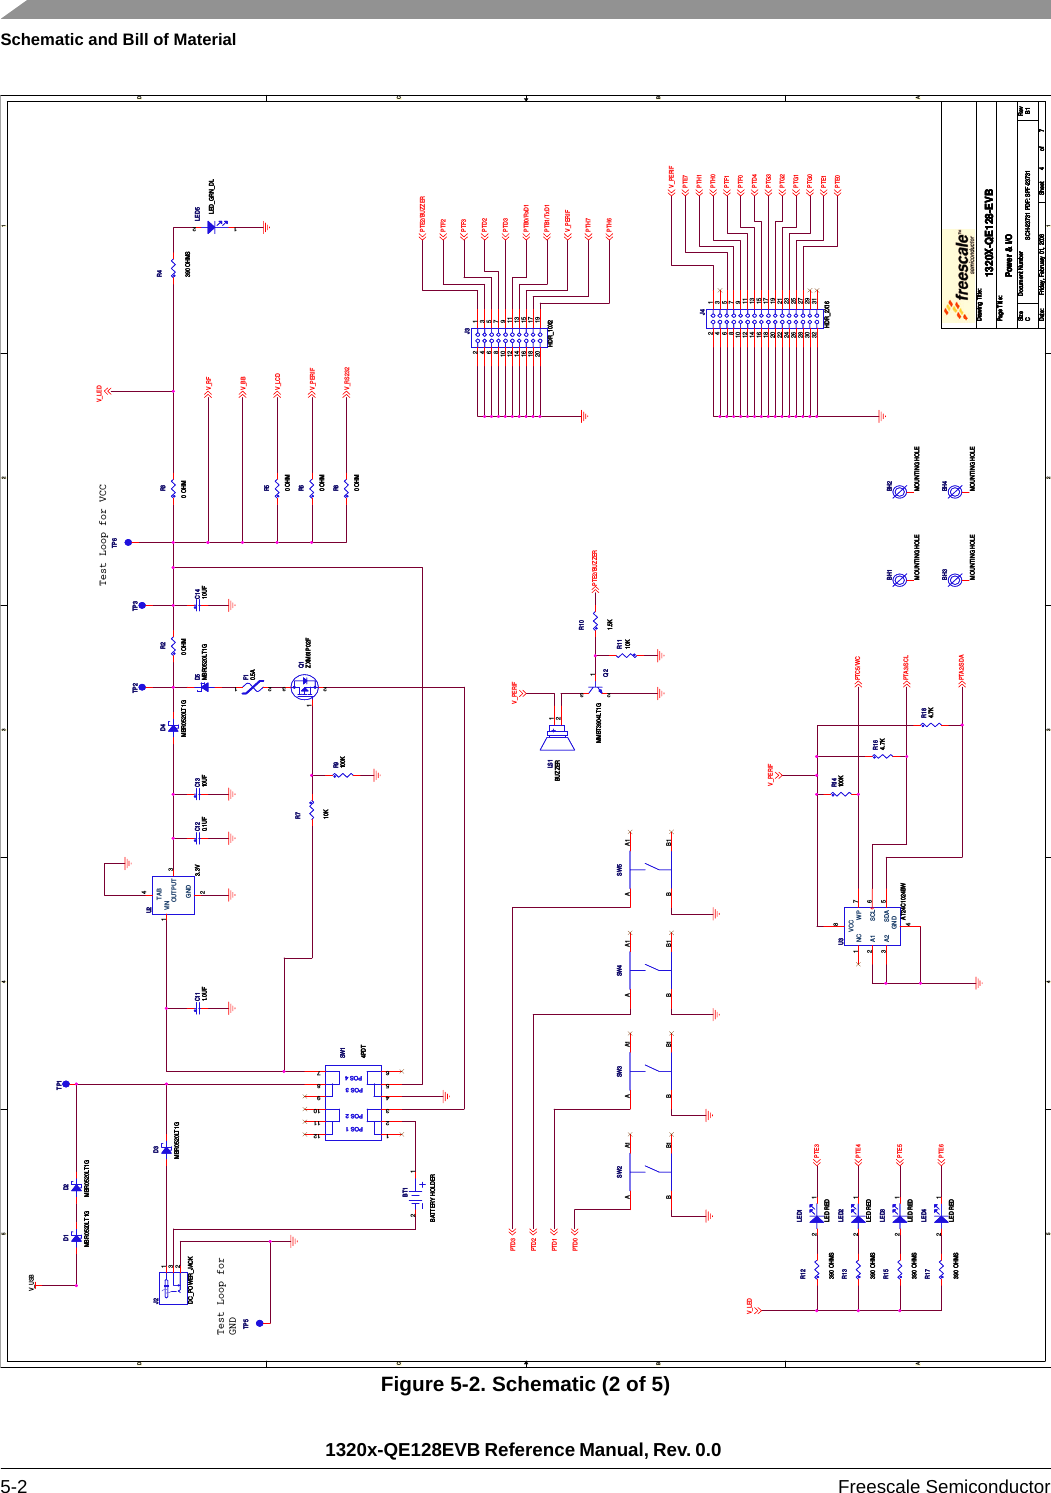 Schematic and Bill of Material1320x-QE128EVB Reference Manual, Rev. 0.0 5-2 Freescale SemiconductorFigure 5-2. Schematic (2 of 5)5544332211D DC CB BA AV_USBV_RFV_BBV_LCDV_PERIFV_LEDV_RS232PTD3PTD2PTD1PTD0V_LEDPTE3PTE4PTE5PTE6V_PERIFPTC5/WCPTA3/SCLPTA2/SDAV_PERIFPTE2/BUZZERPTE2/BUZZERPTF2PTF3PTD2PTD3PTB0/RxD1PTB1/TxD1V_PERIFPTH7PTH6PTE7PTH1PTH0PTF1PTF0PTD4PTG3PTG2PTG1PTG0PTE1PTE0V_PERIFDrawing Title:Size Document Number RevDate: Sheet ofPage Title:SCH-23731 PDF: SPF-23731 B11320X-QE128-EVBCFriday, February 01, 2008Power &amp; I/O47Drawing Title:Size Document Number RevDate: Sheet ofPage Title:SCH-23731 PDF: SPF-23731 B11320X-QE128-EVBCFriday, February 01, 2008Power &amp; I/O47Drawing Title:Size Document Number RevDate: Sheet ofPage Title:SCH-23731 PDF: SPF-23731 B11320X-QE128-EVBCFriday, February 01, 2008Power &amp; I/O47Test Loop for VCCTest Loop forGNDBH3MOUNTING HOLEBH3MOUNTING HOLELED2LED REDLED2LED RED2 1Q1ZXM61P02FQ1ZXM61P02F132R9100KR9100KSW5SW5ABB1A1J2DC_POWER_JACKJ2DC_POWER_JACK123R710KR710KTP5TP5R15390 OHMSR15390 OHMSR4390 OHMSR4390 OHMSSW4SW4ABB1A1U23.3VU23.3VGND2OUTPUT 3VIN1TAB4LED1LED REDLED1LED RED2 1Q2MMBT3904LT1GQ2MMBT3904LT1G2 31R60 OHMR60 OHMSW3SW3ABB1A1LED5LED_GRN_DLLED5LED_GRN_DL21J4HDR_2X16J4HDR_2X1612346 57891011121314151617181920212223242526272829303132BH2MOUNTING HOLEBH2MOUNTING HOLED3MBR0520LT1GD3MBR0520LT1GR14100KR14100KSW2SW2ABB1A1R20 OHMR20 OHMTP6TP6D1MBR0520LT1GD1MBR0520LT1GR13390 OHMSR13390 OHMSR80 OHMR80 OHMLED4LED REDLED4LED RED2 1C120.1UFC120.1UFD2MBR0520LT1GD2MBR0520LT1GR164.7KR164.7KPOS 1POS 2POS 3POS 4SW14PDTPOS 1POS 2POS 3POS 4SW14PDT123456121110987BT1BATTERY HOLDERBT1BATTERY HOLDER12R50 OHMR50 OHMR101.5KR101.5KBH1MOUNTING HOLEBH1MOUNTING HOLETP2TP2R12390 OHMSR12390 OHMSC111.0UFC111.0UFJ3HDR_10X2J3HDR_10X212346 57891011121314151617181920TP3TP3LED3LED REDLED3LED RED2 1D4MBR0520LT1GD4MBR0520LT1G+LS1BUZZER+LS1BUZZER12BH4MOUNTING HOLEBH4MOUNTING HOLER30 OHMR30 OHMU3AT24C1024BWU3AT24C1024BWNC1A12A23GND4WP 7SDA 5SCL 6VCC8C1410UFC1410UFF10.5AF10.5A12D5MBR0520LT1GD5MBR0520LT1GC1310UFC1310UFR184.7KR184.7KTP1TP1R17390 OHMSR17390 OHMSR1110KR1110K